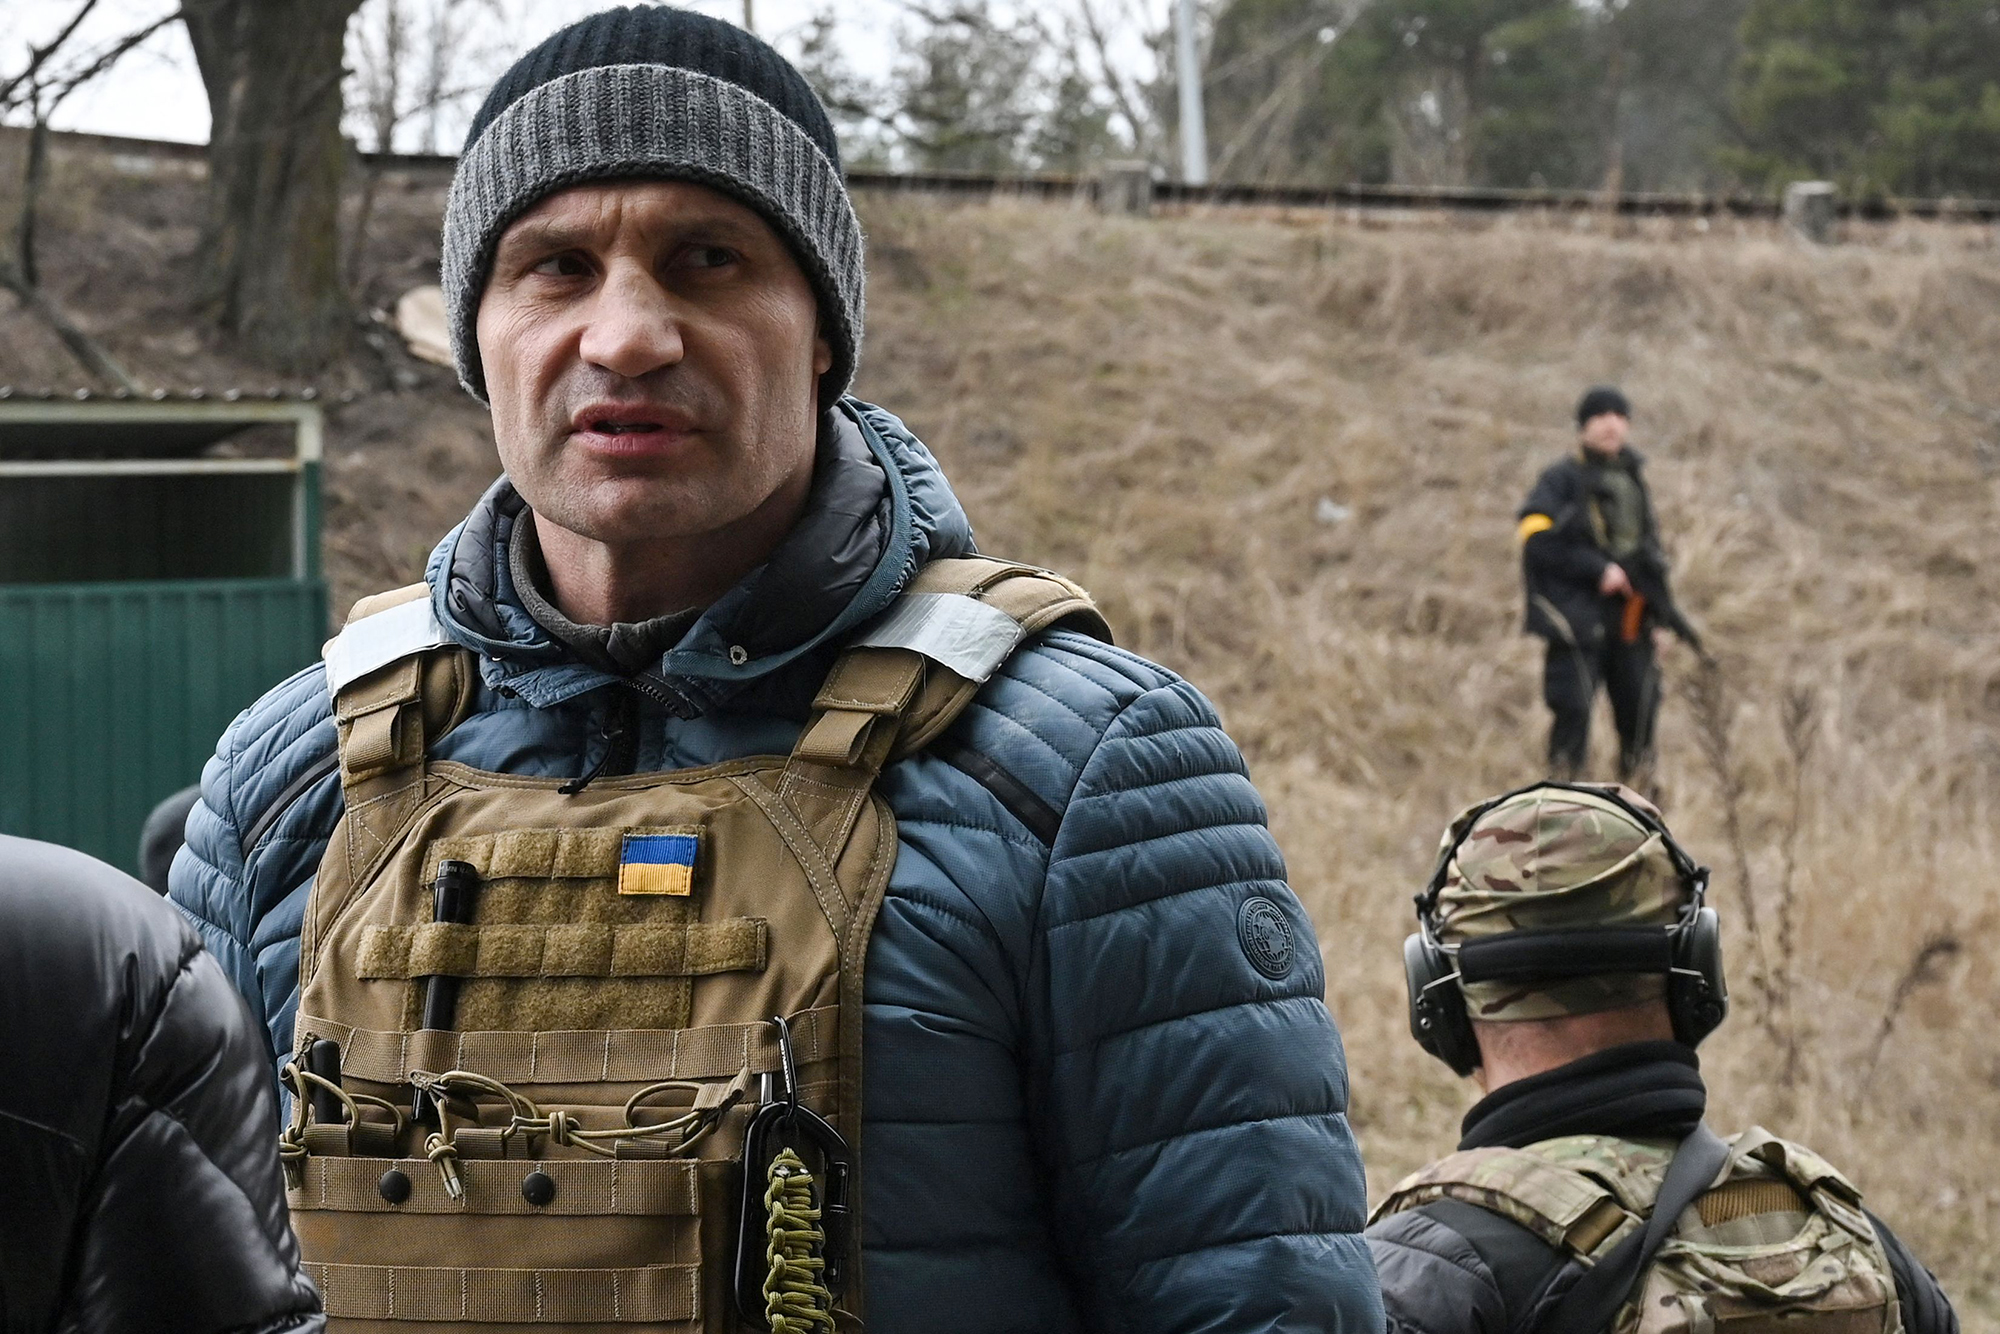 Kyiv Mayor Vitali Klitschko stands with troops at a checkpoint on the outskirts of Kyiv, Ukraine on March 6. 